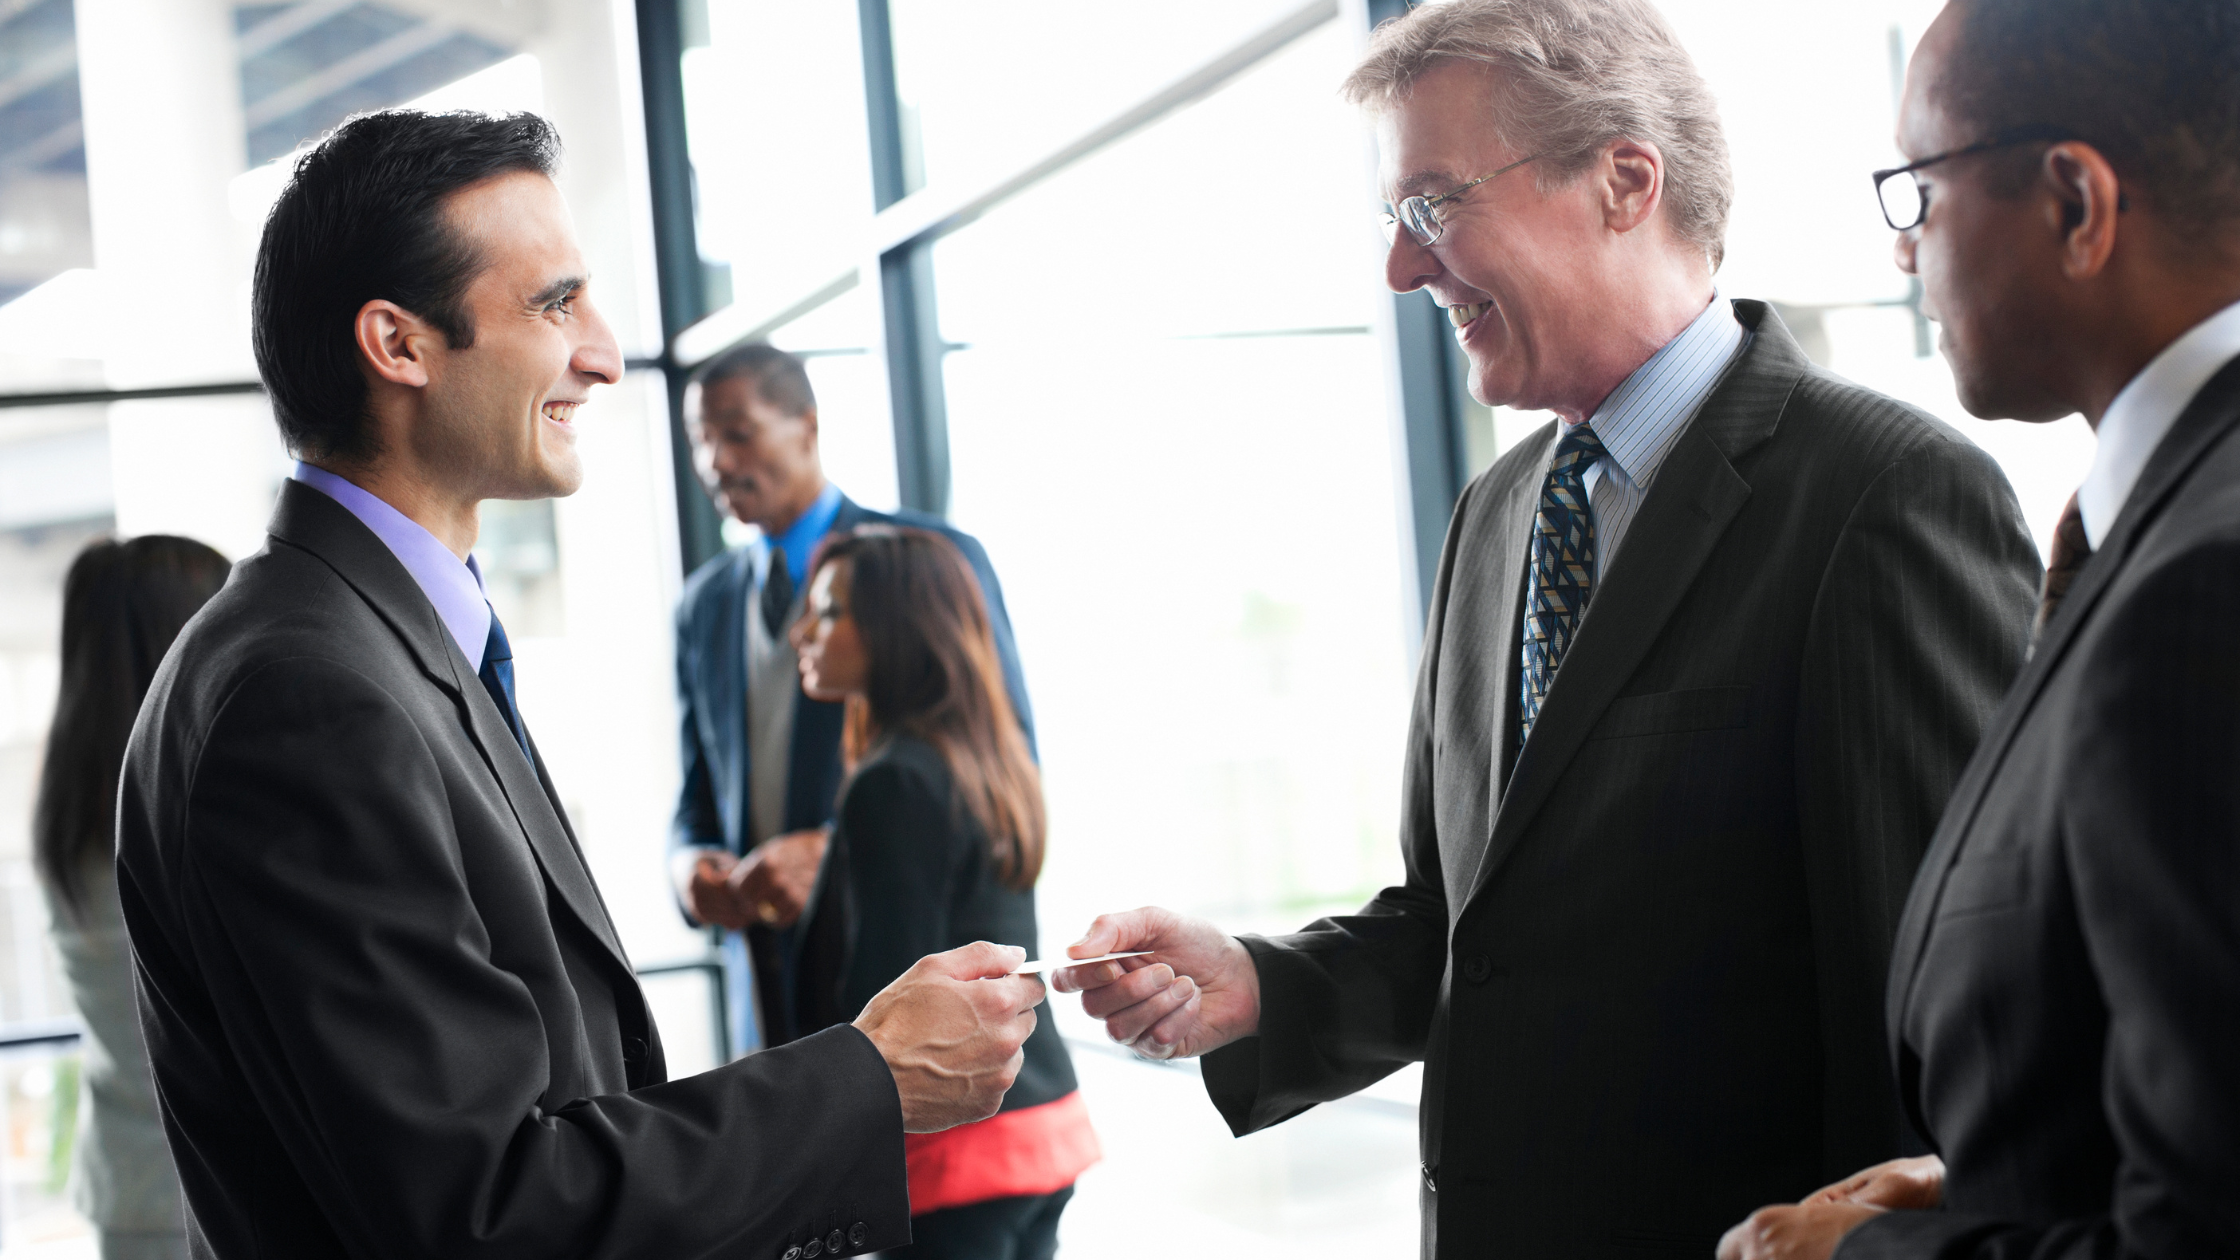 5 Insider Tips for Attending Networking Events